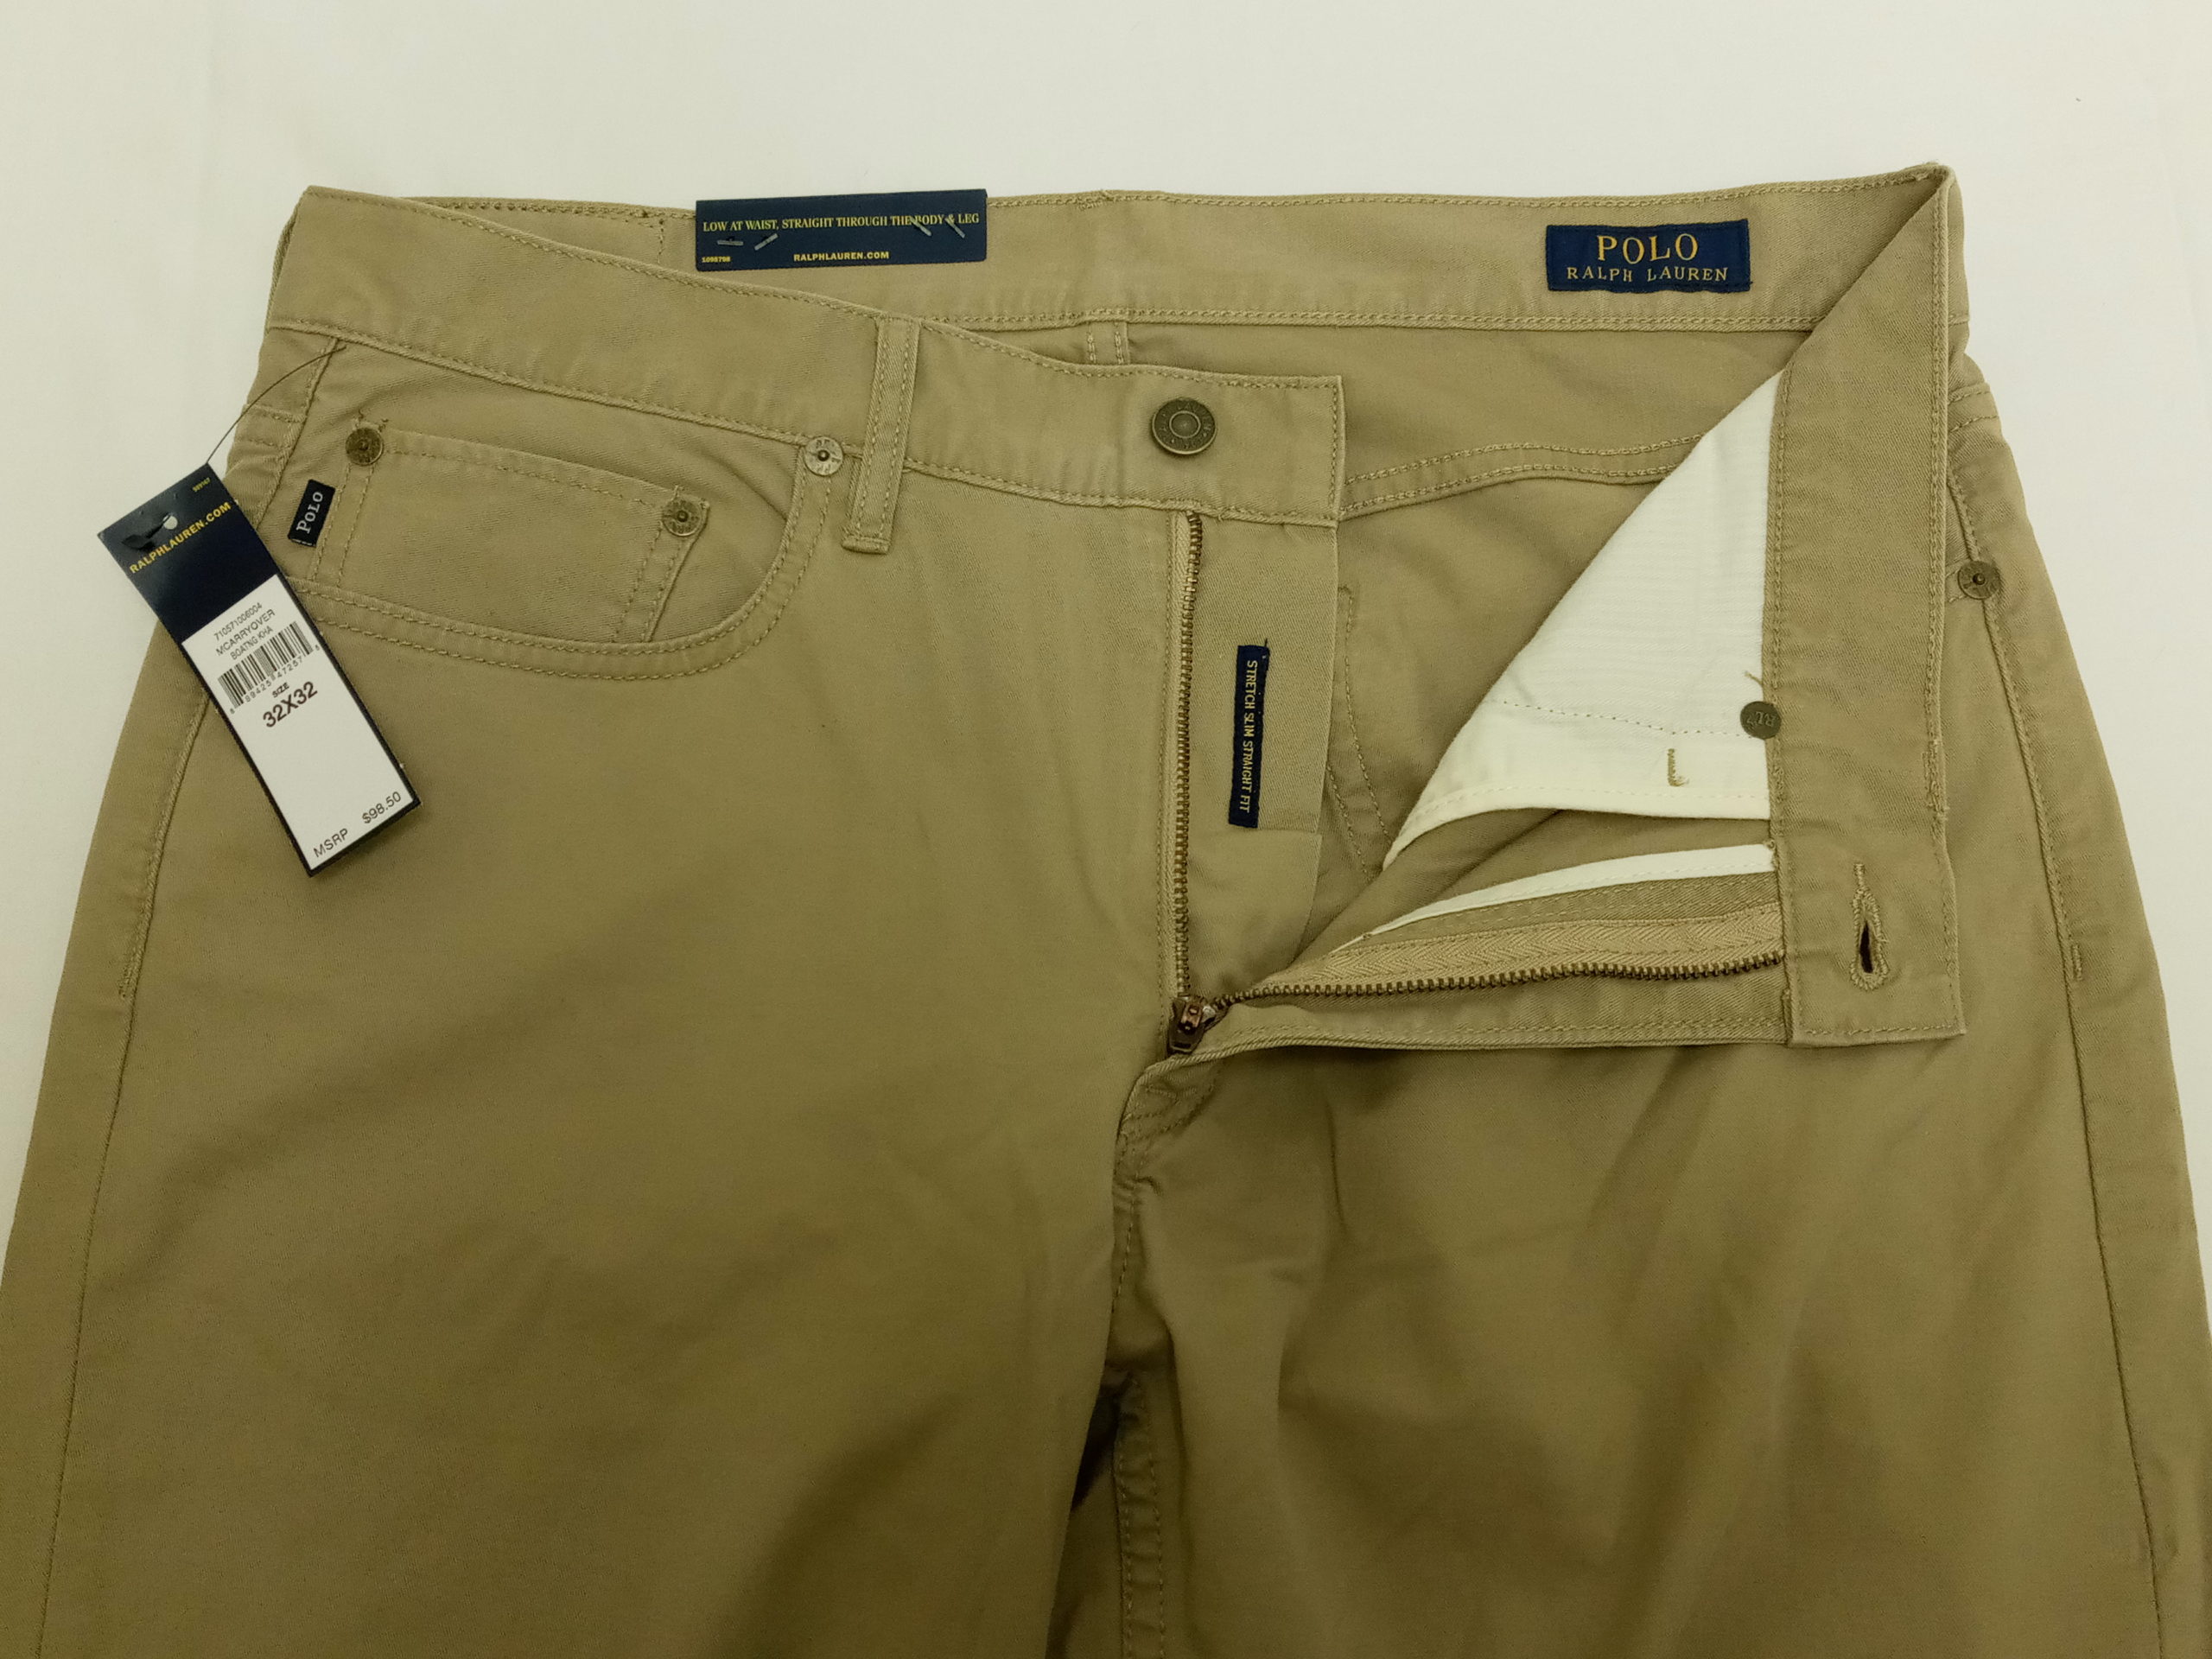 Costa almohada Parche Men's POLO Ralph Lauren Stretch Slim Fit Boating Khaki Pants 32 x 32 -  Rescue Missions Ministries Thrift Store